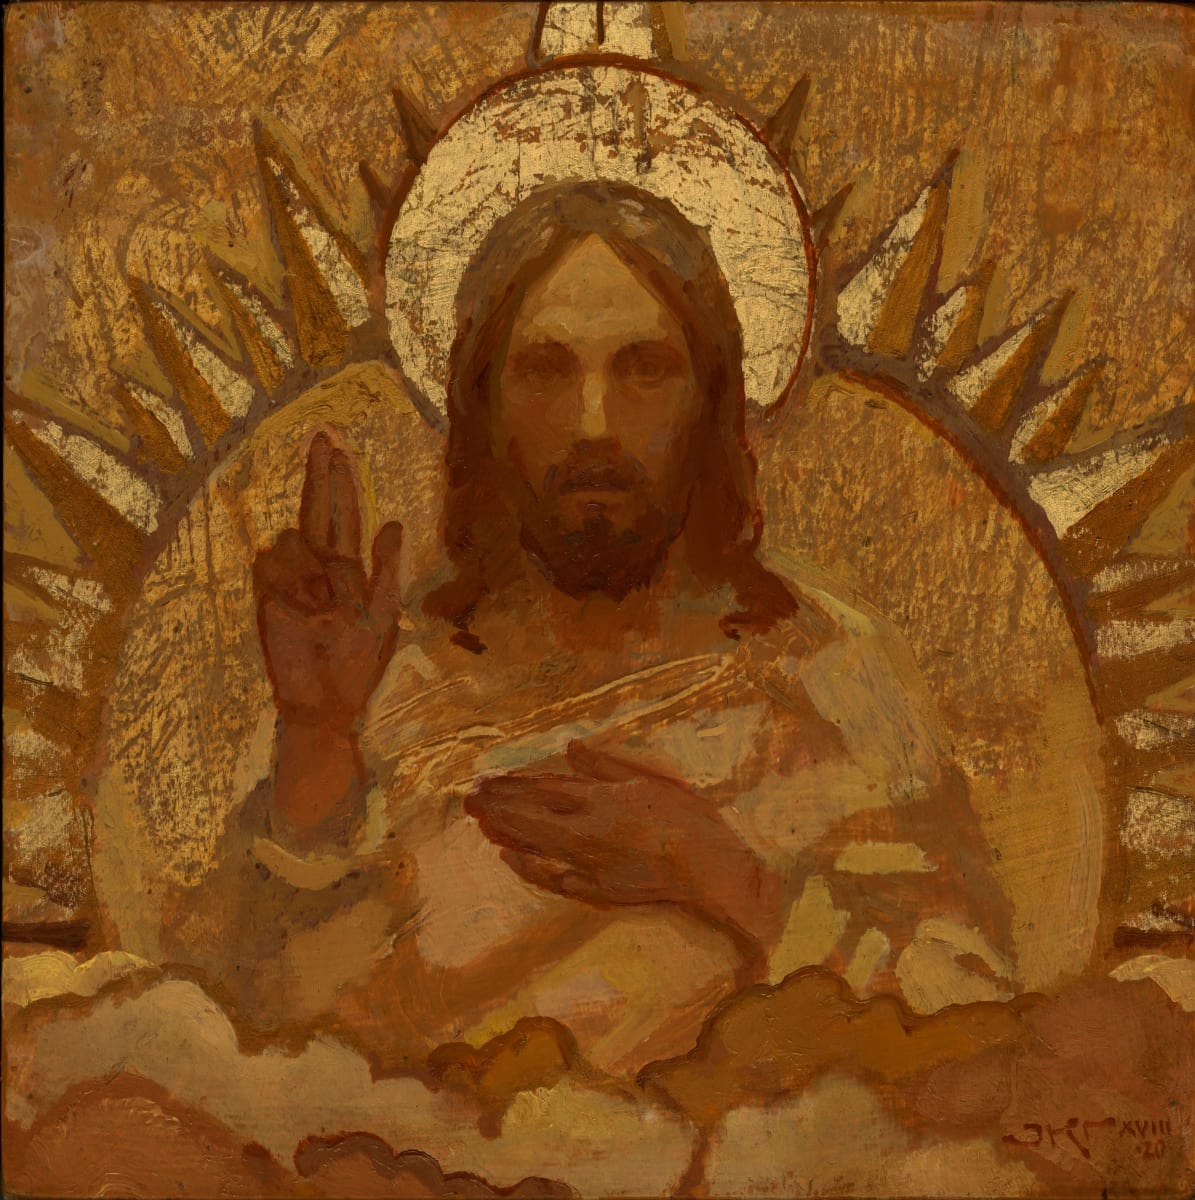 Pantocrator by J. Kirk Richards  Image: A specific depiction of Christ from Byzantine iconography, which symbolized Christ as all-powerful and world-creator. 